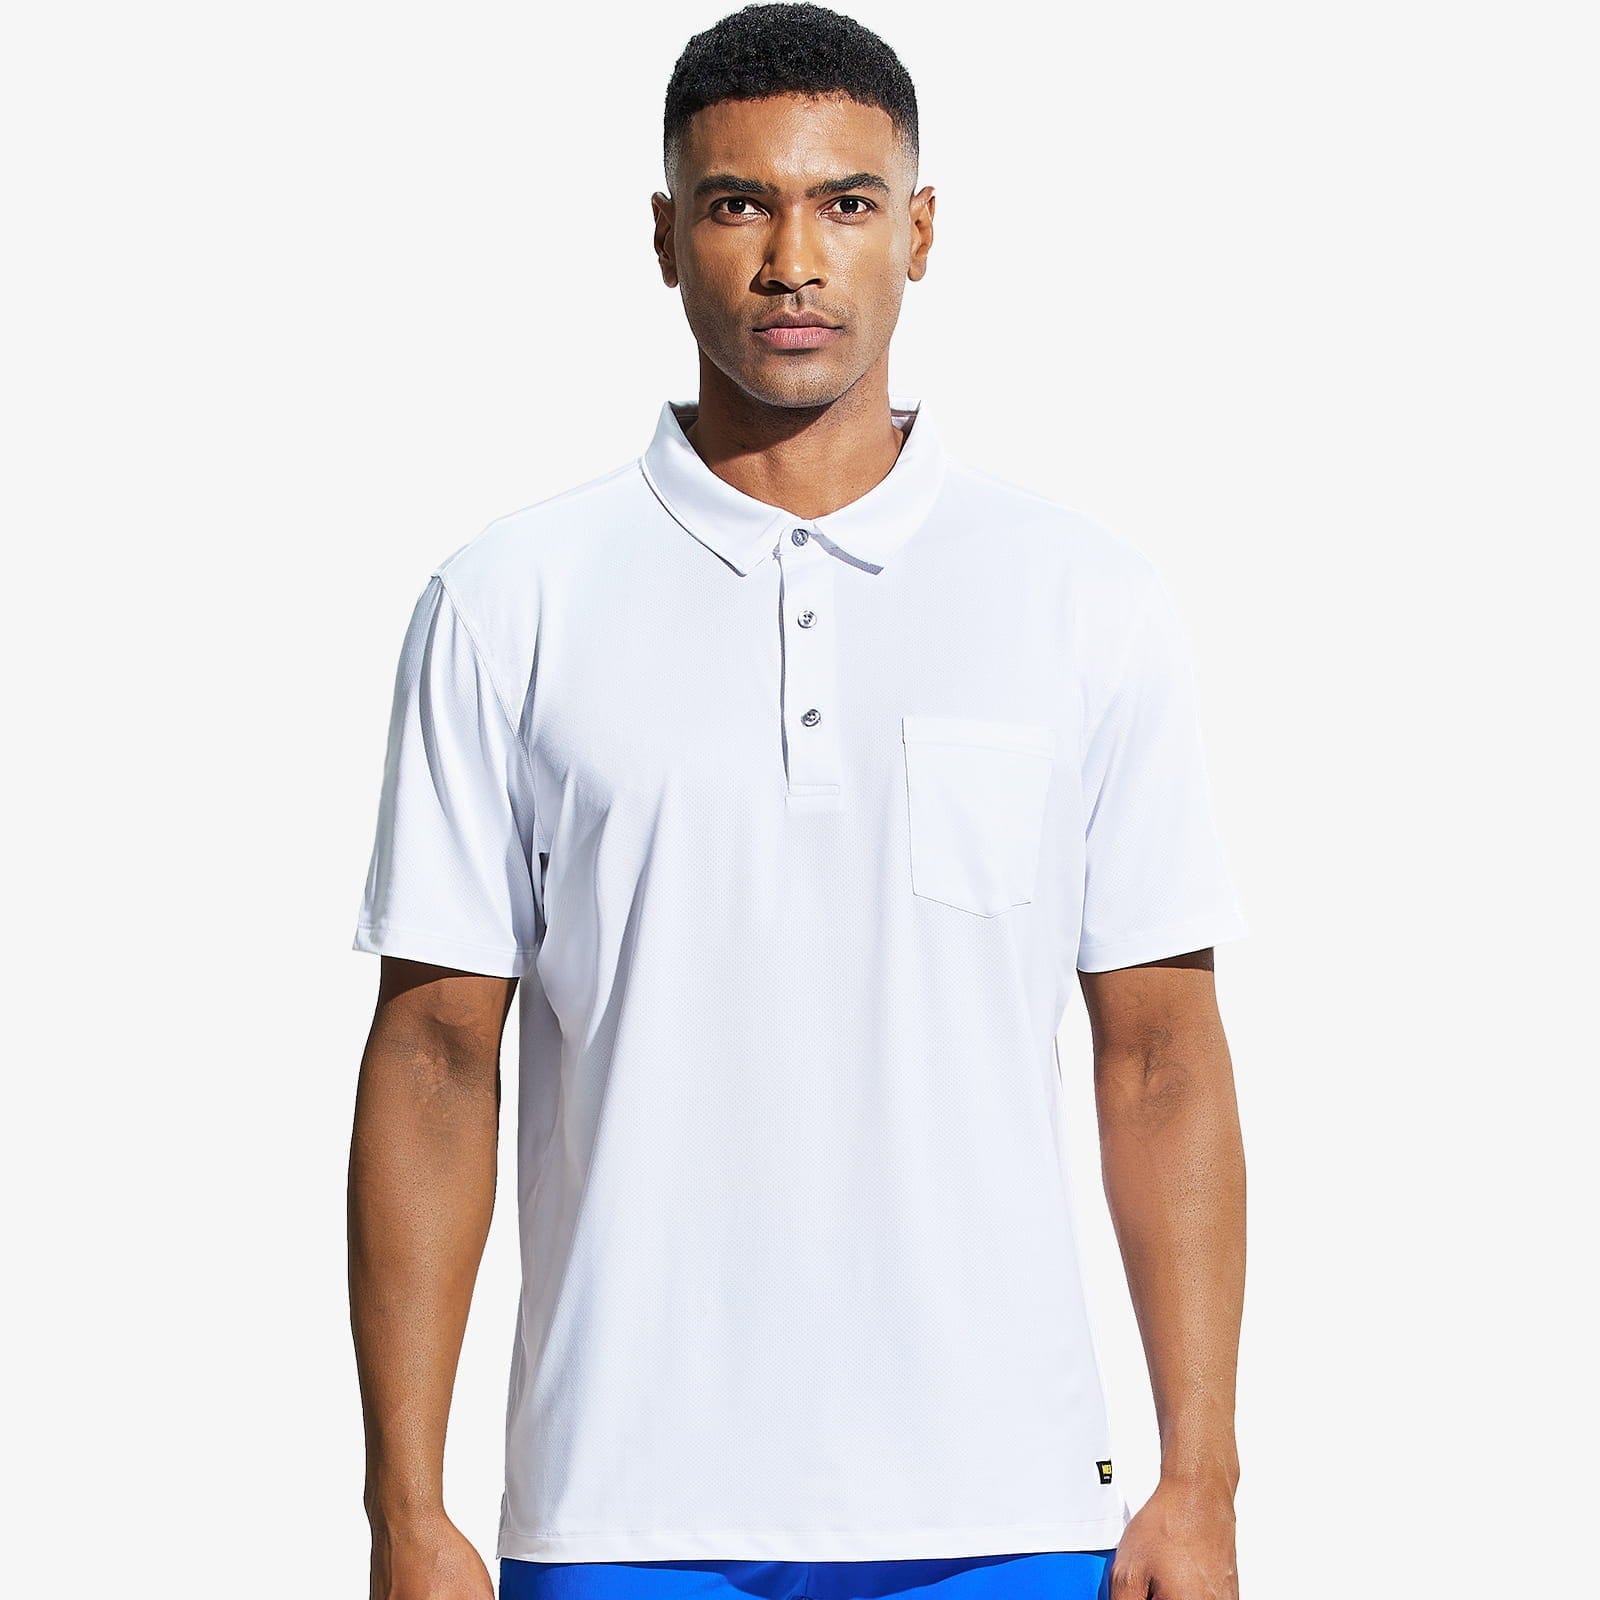 MIER Men's Dry Fit Golf Polo Shirts Collared with Pocket